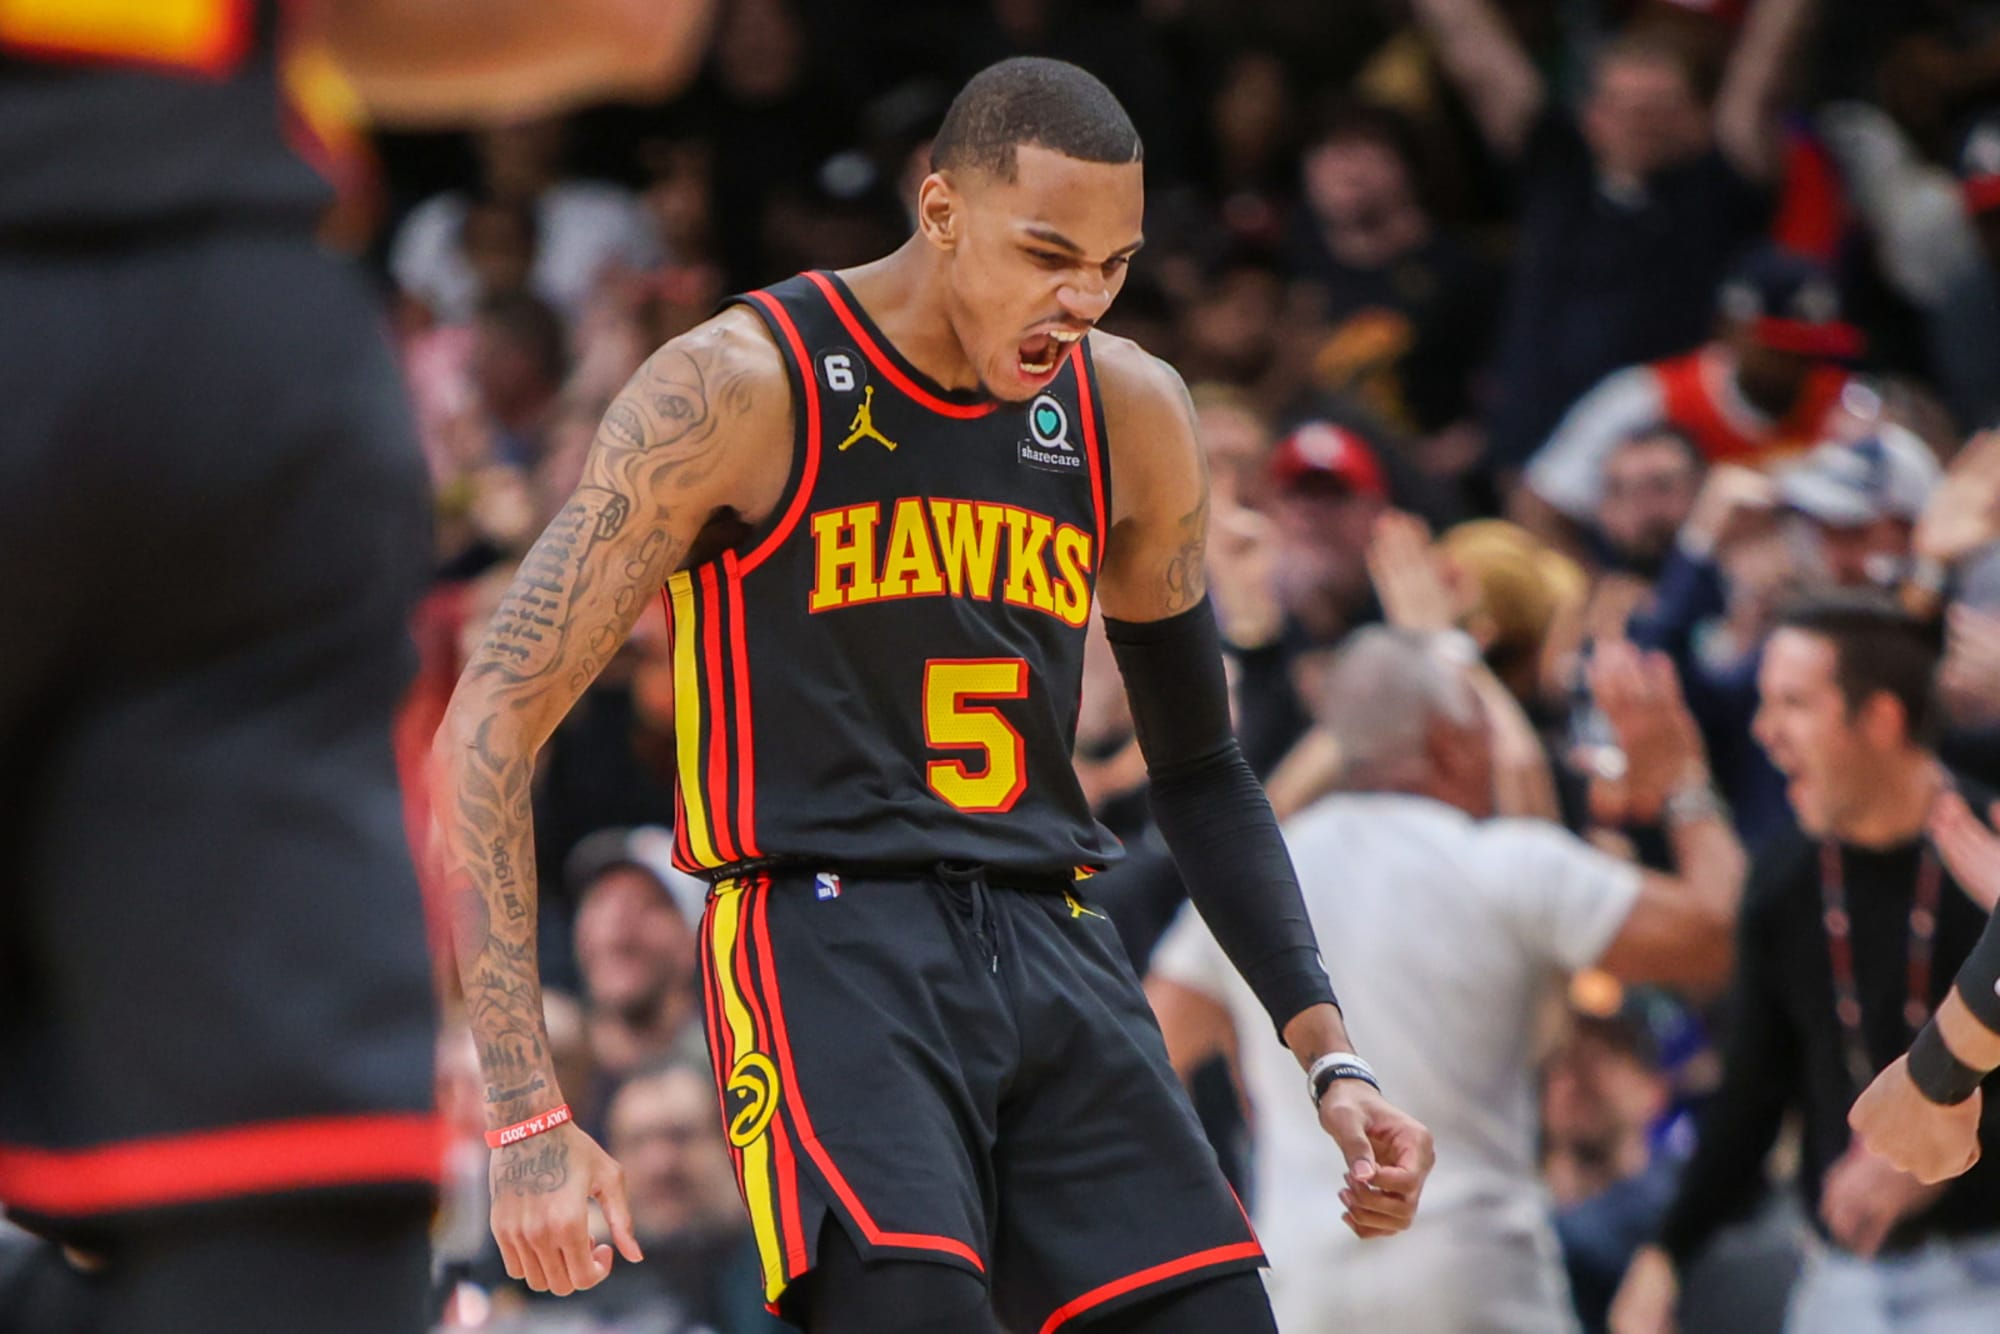 Hawks agree to $120 million, 4-year contract extension with Murray